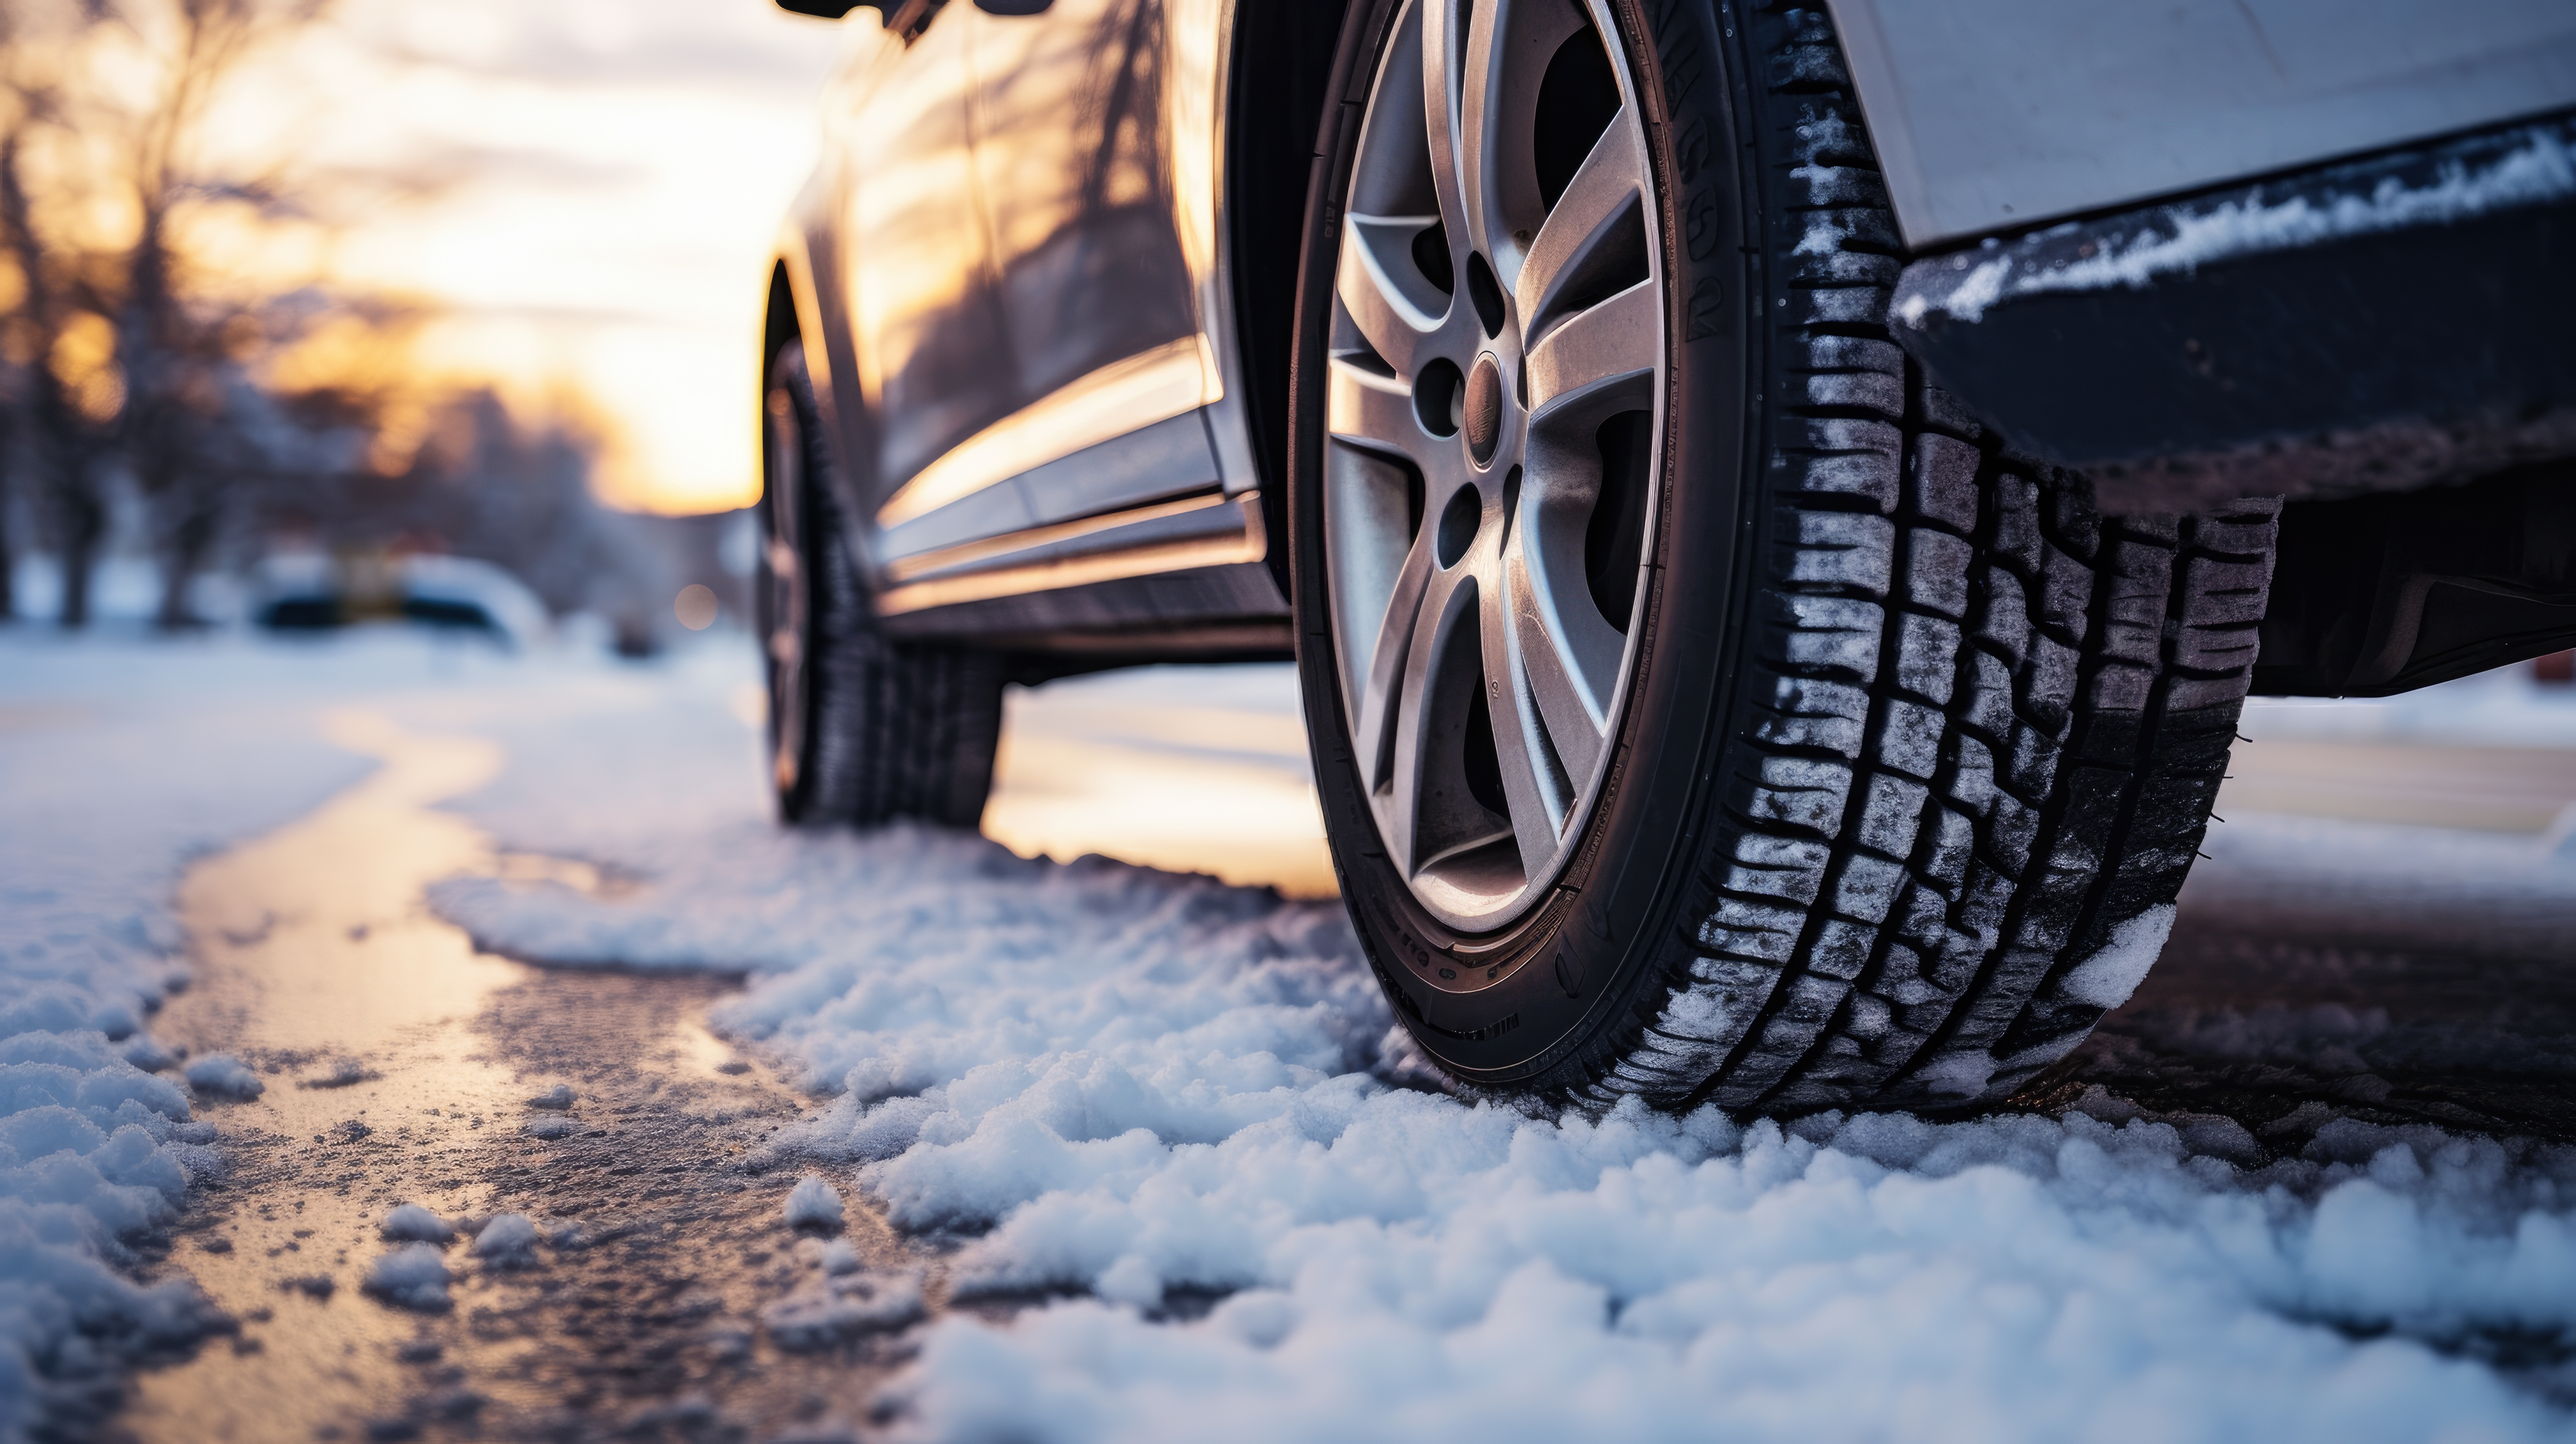 Santa Fe KIA says don’t get left out in the cold, Winterize Your Car